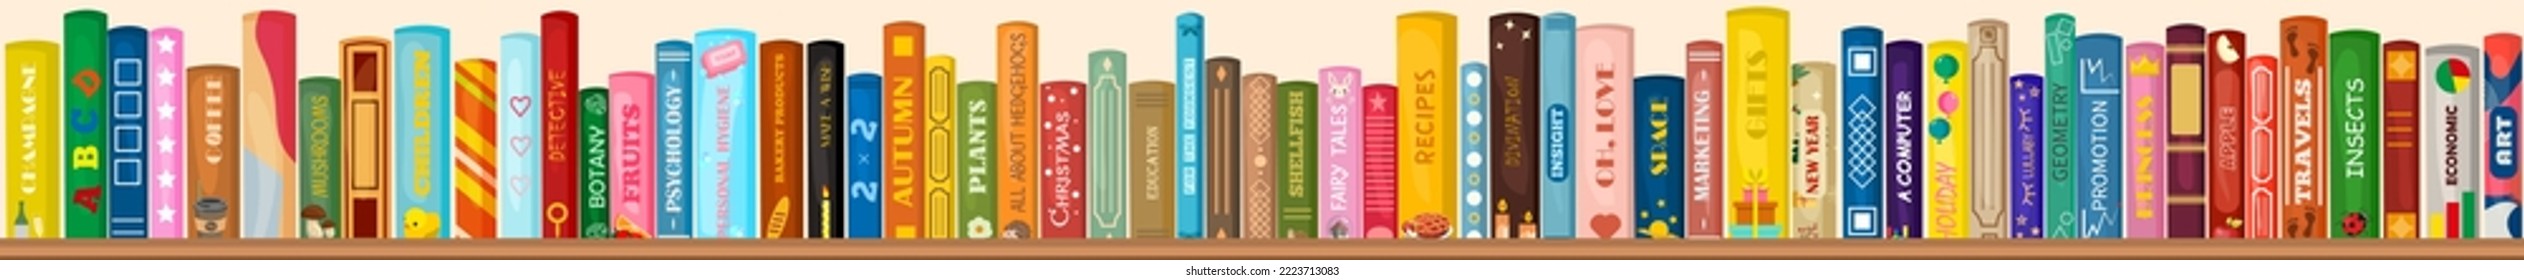 Vector bookshelf made of wood with books. Literature for the whole family. Children's reading. Creative banner for bookstore, library, fairs.